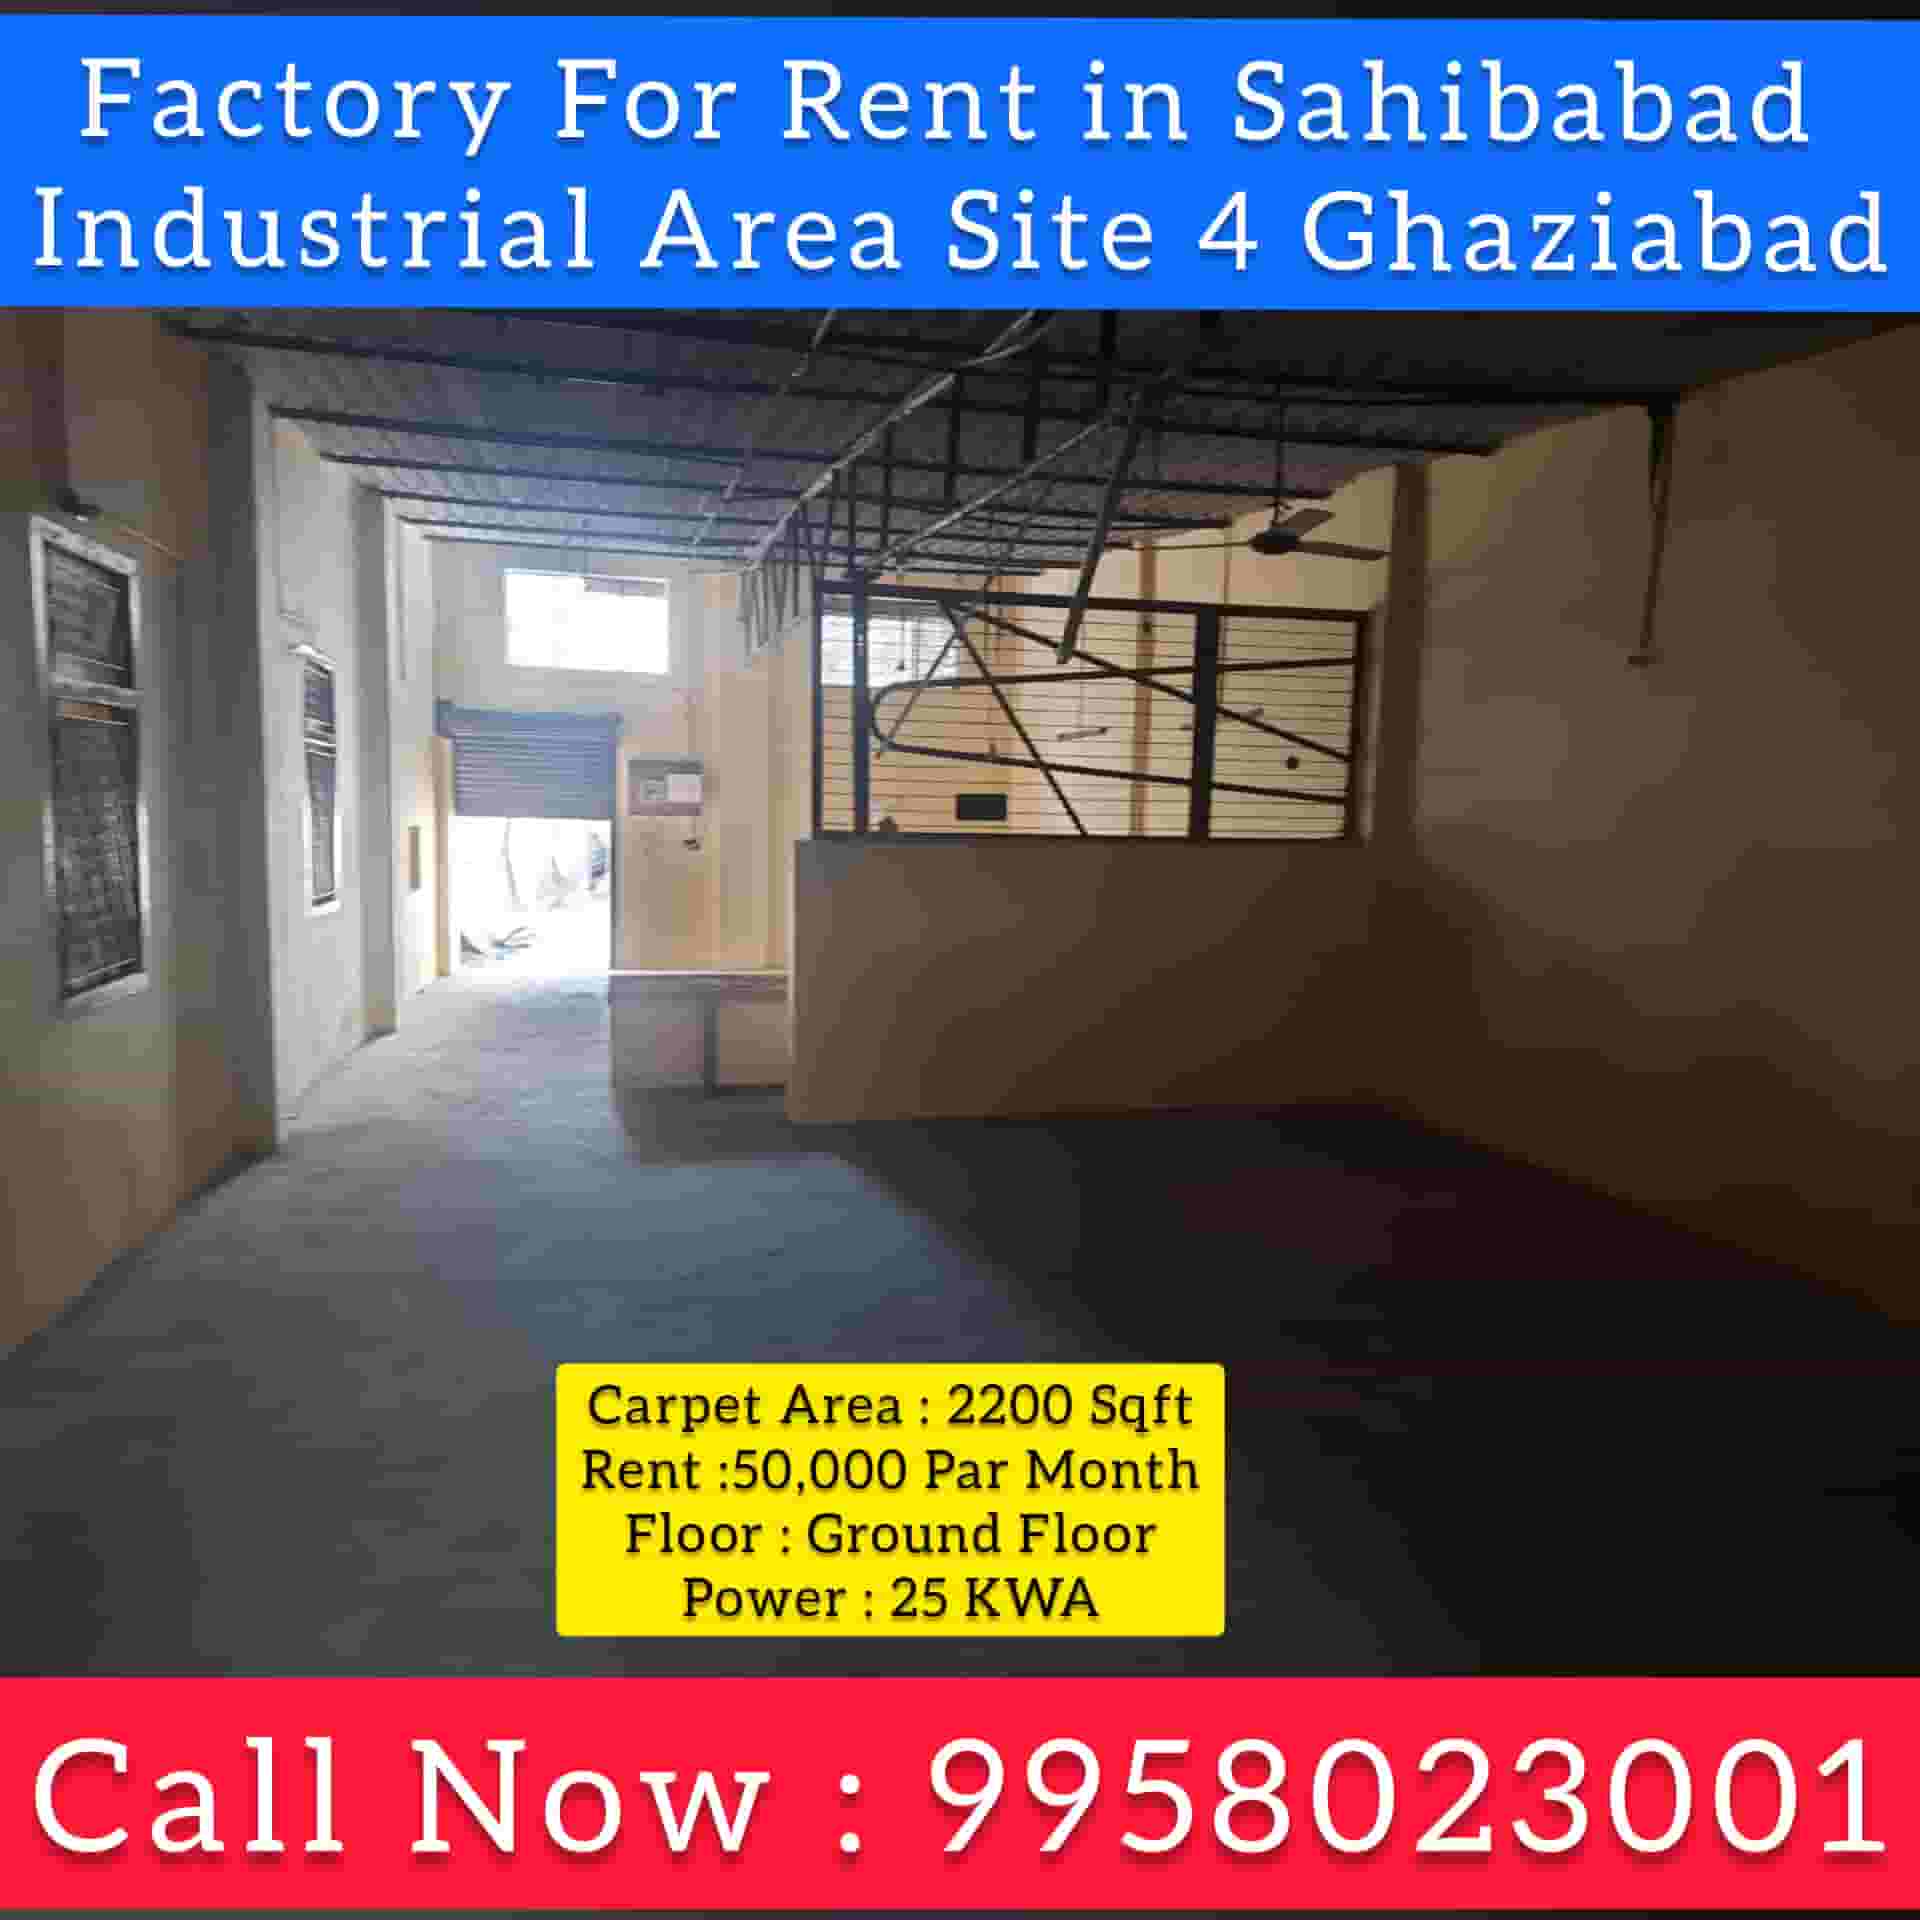 factory for rent in Sahibabad Industrial Area Site 4 